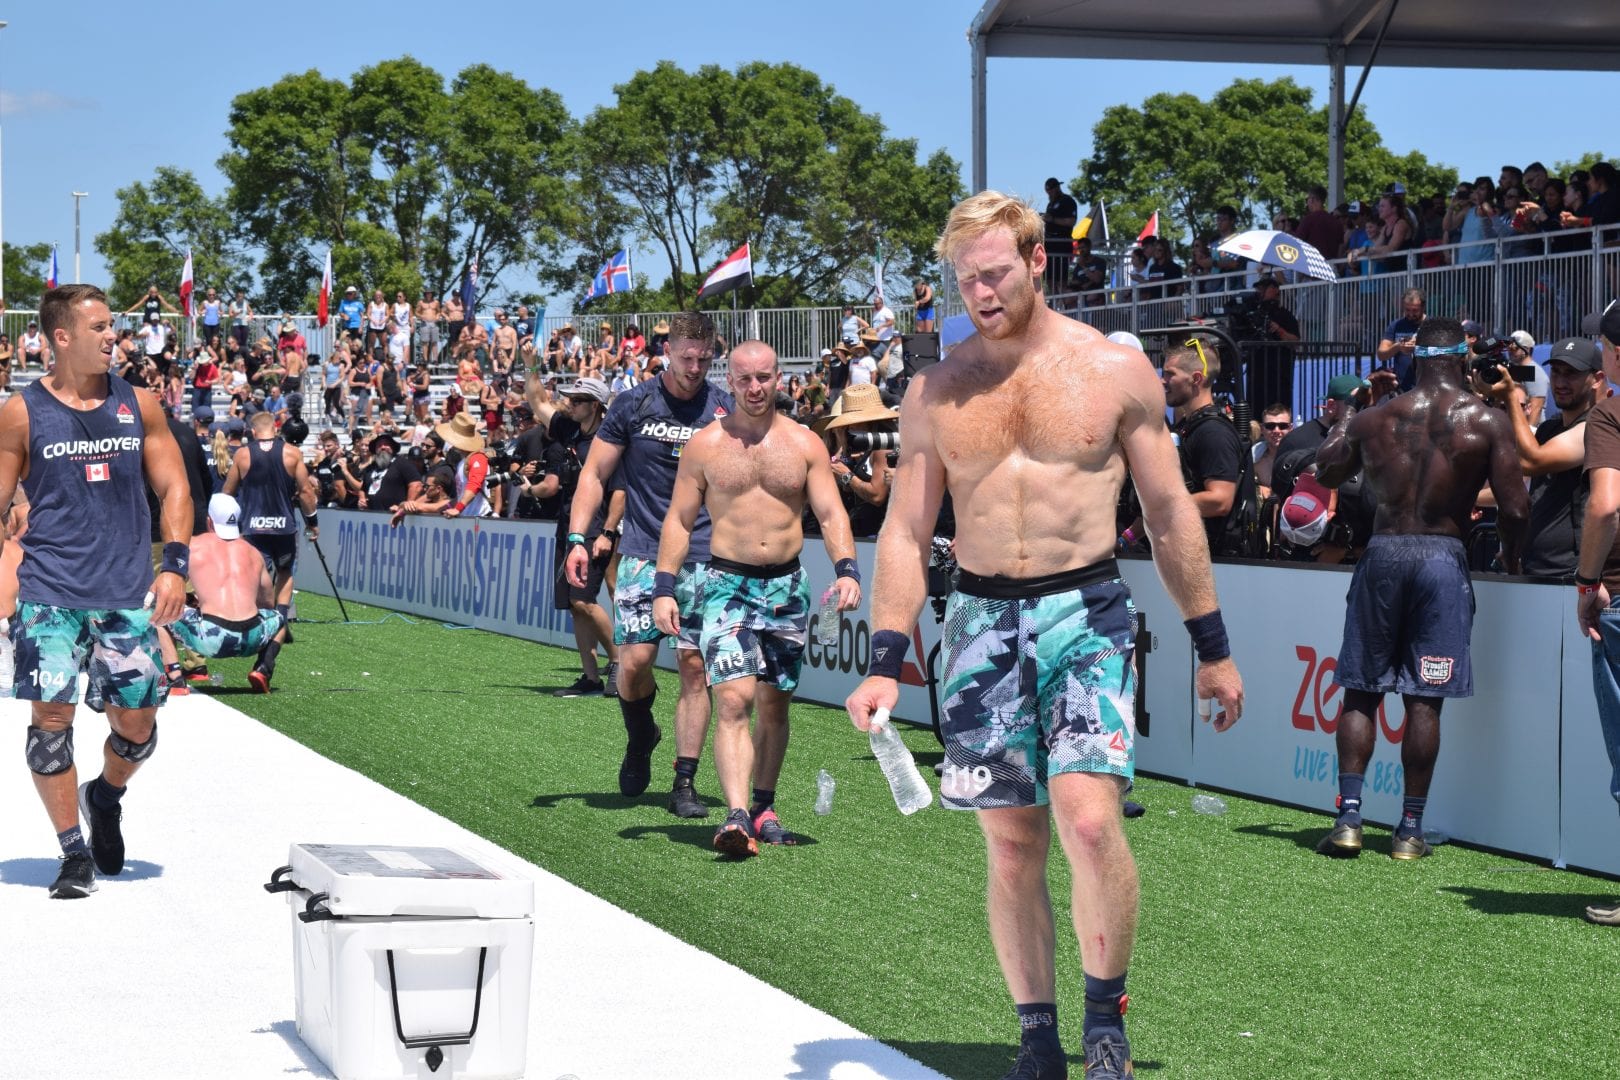 Patrick Vellner leaves the stadium after an event at the 2019 CrossFit Games